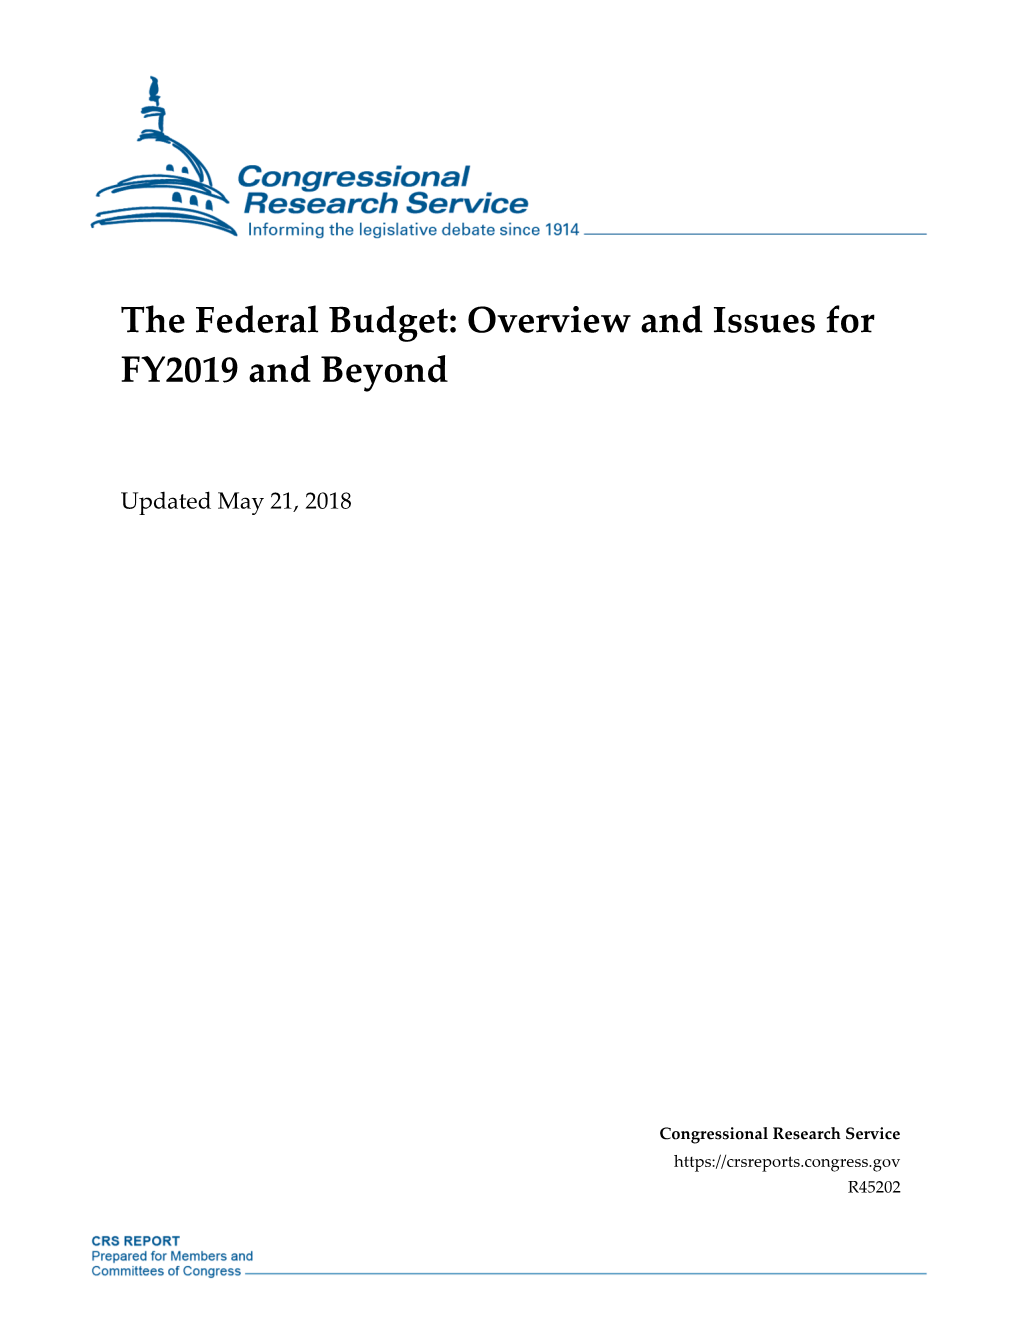 The Federal Budget: Overview and Issues for FY2019 and Beyond